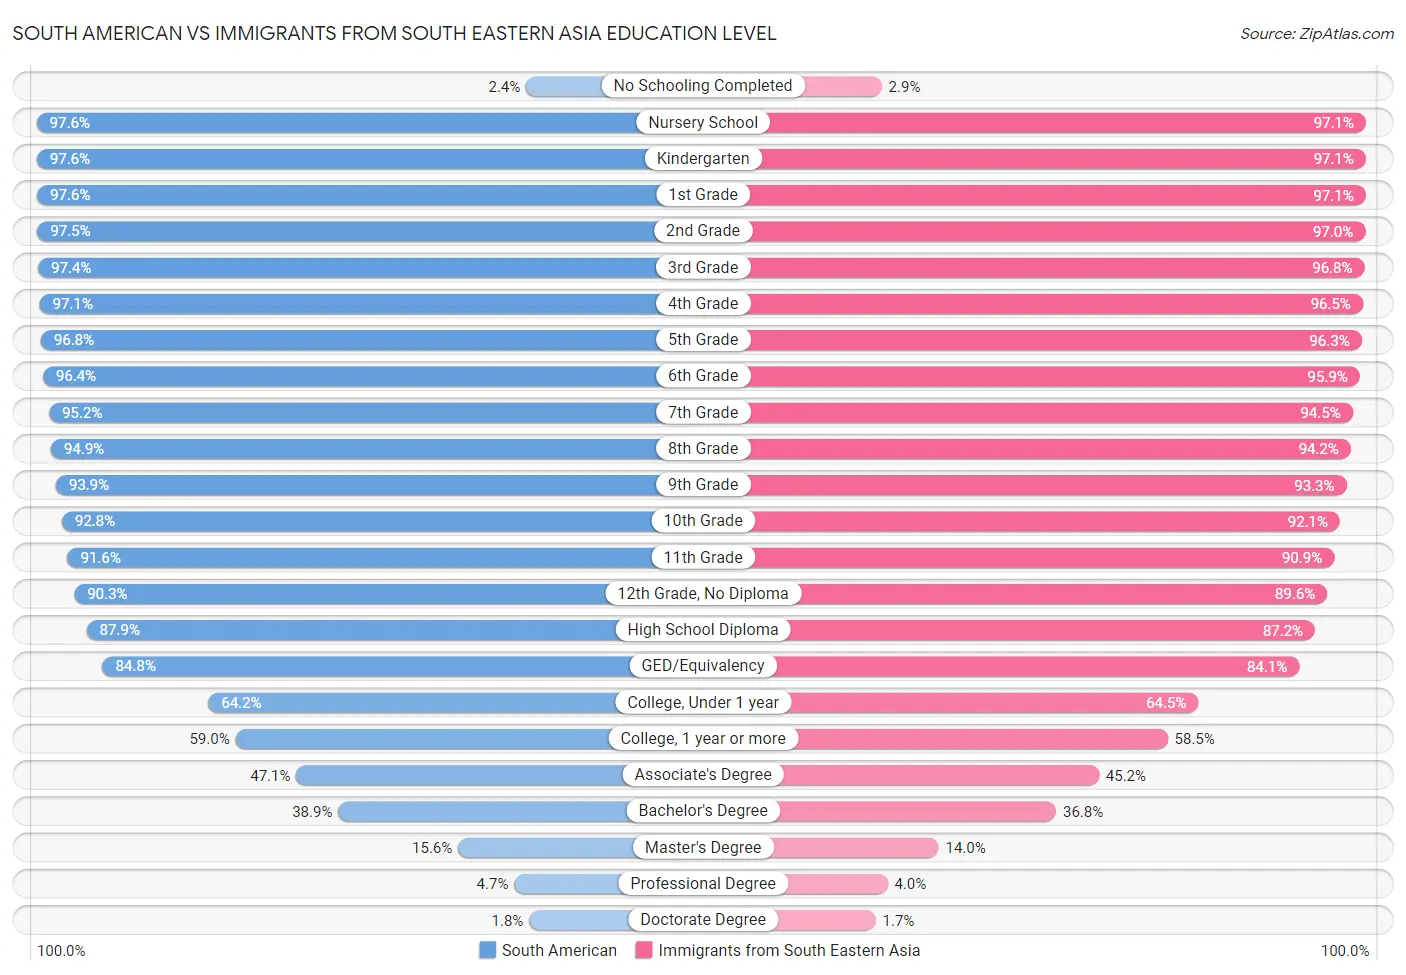 South American vs Immigrants from South Eastern Asia Education Level